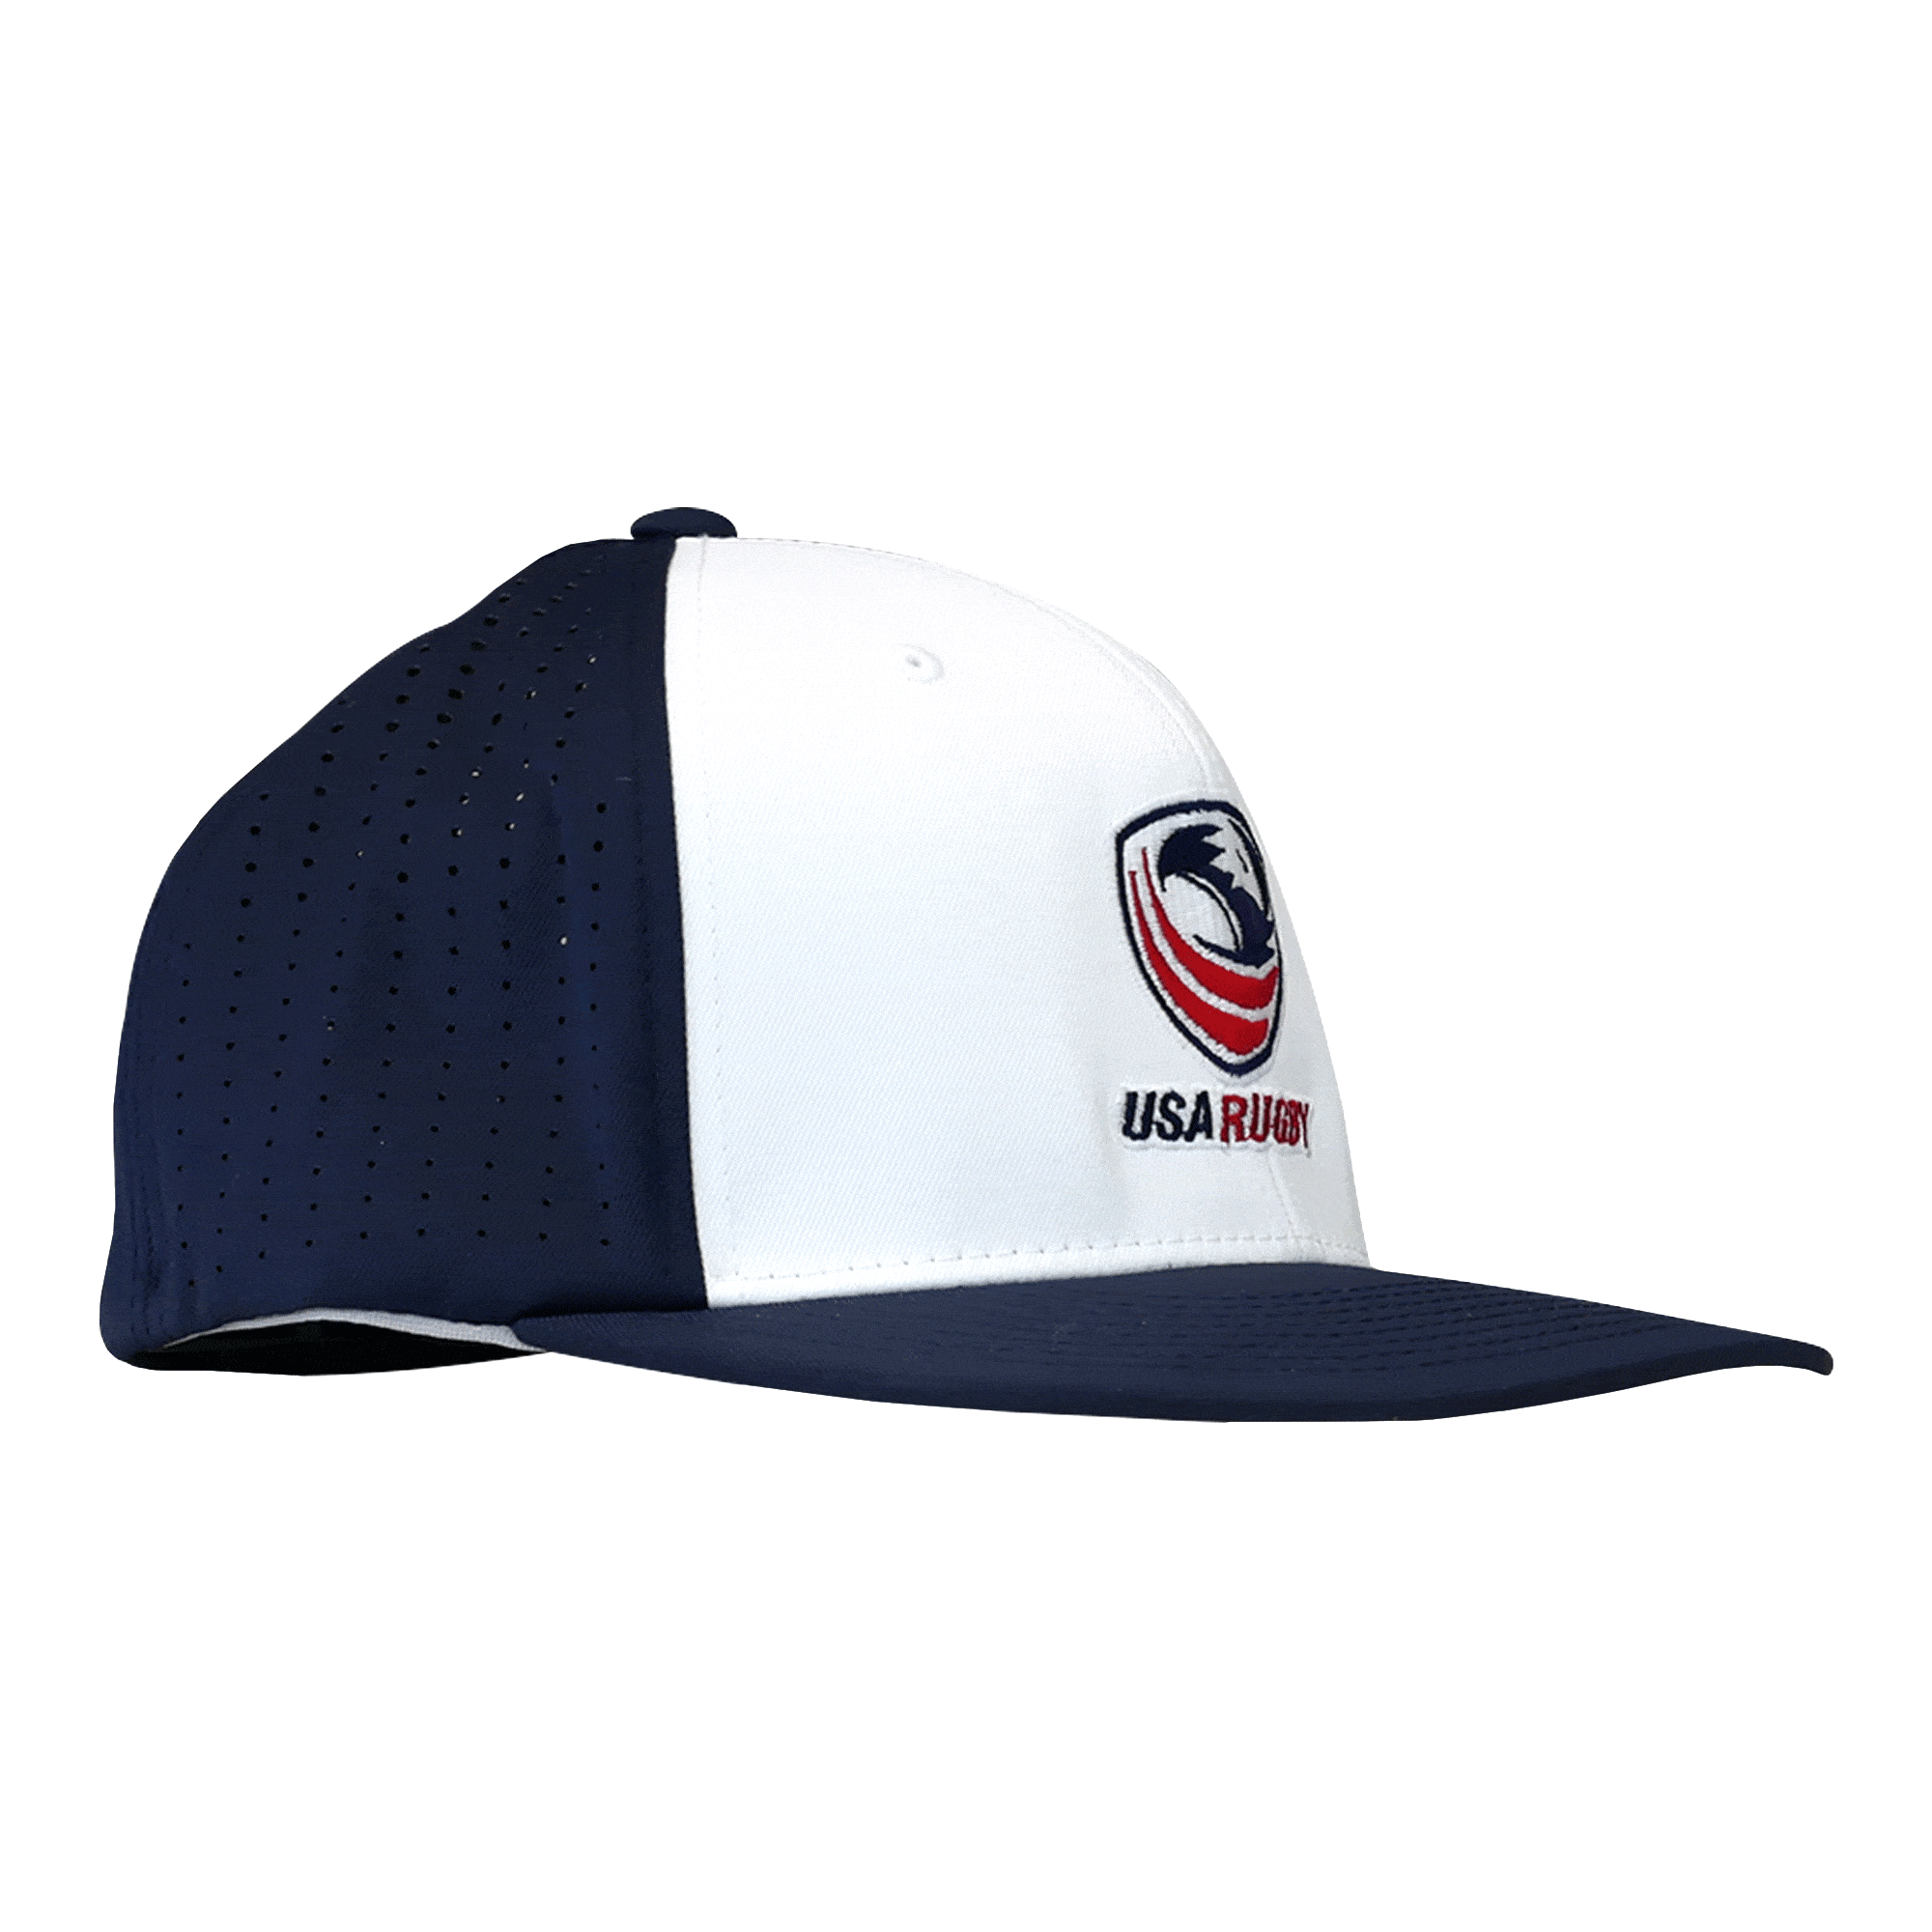 Performance Rugby World Rugby Perforated Shop Flexfit Cap - USA